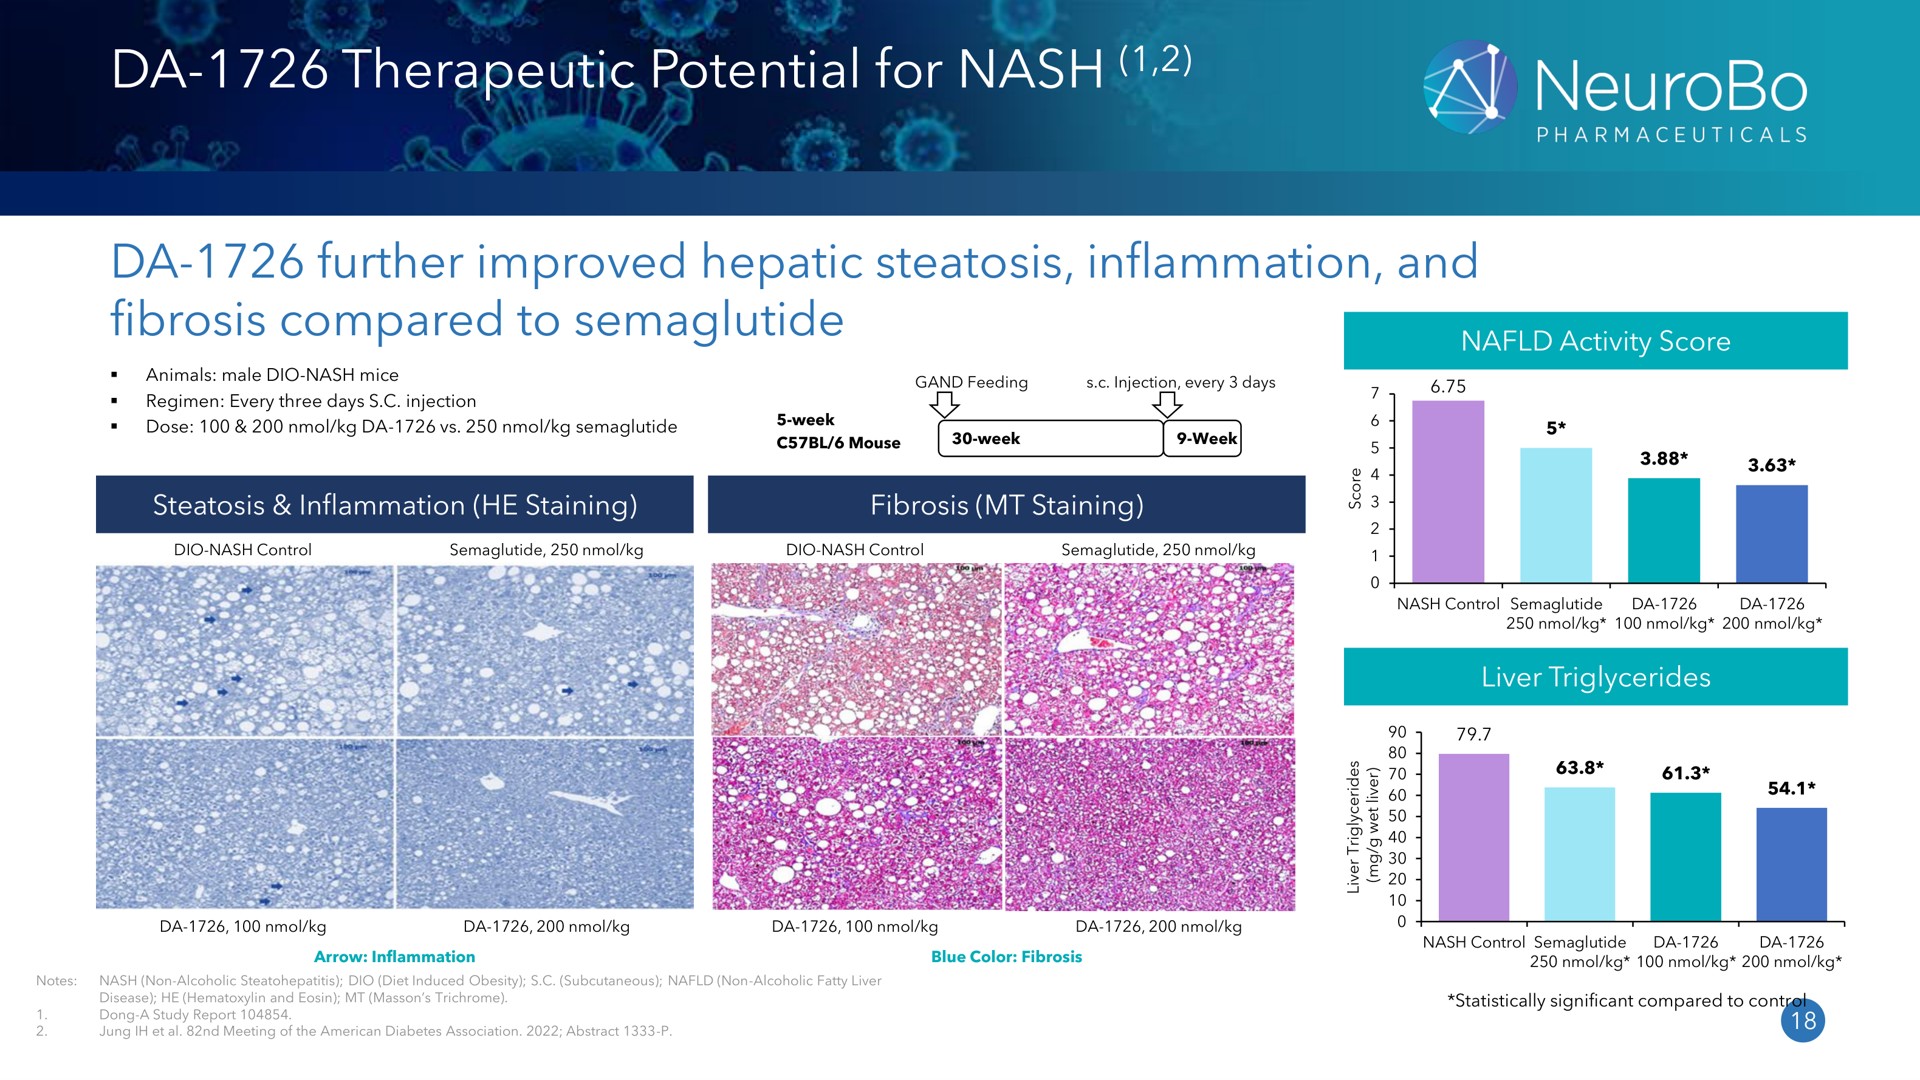 therapeutic potential for nash further improved hepatic steatosis inflammation and fibrosis compared to seme mouse | NeuroBo Pharmaceuticals